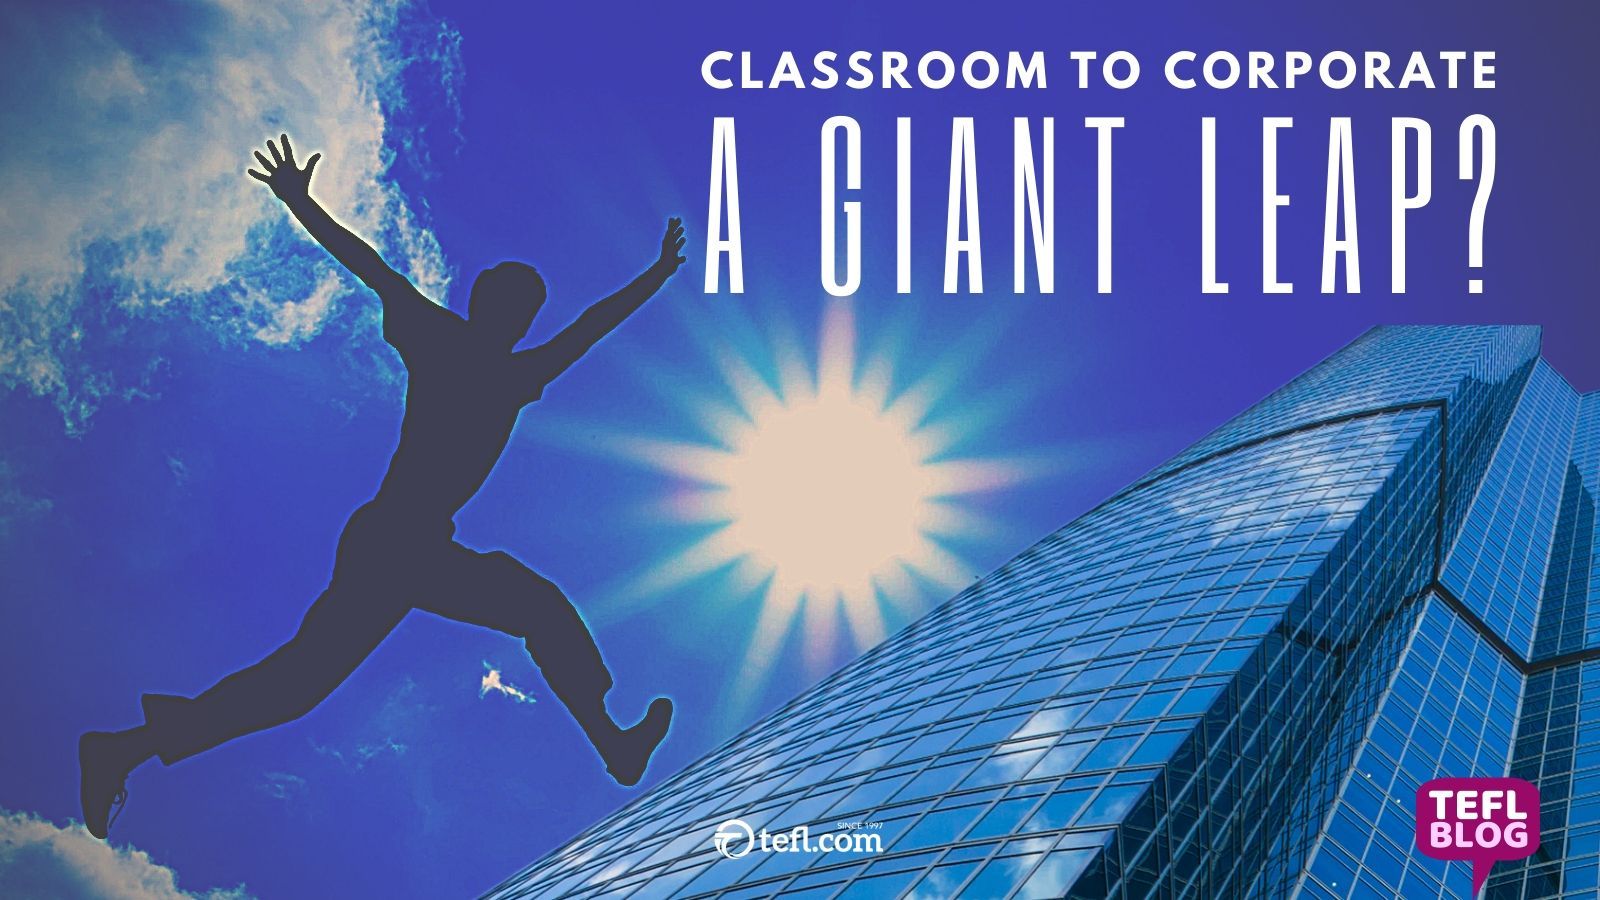 Classroom to corporate - A giant leap?